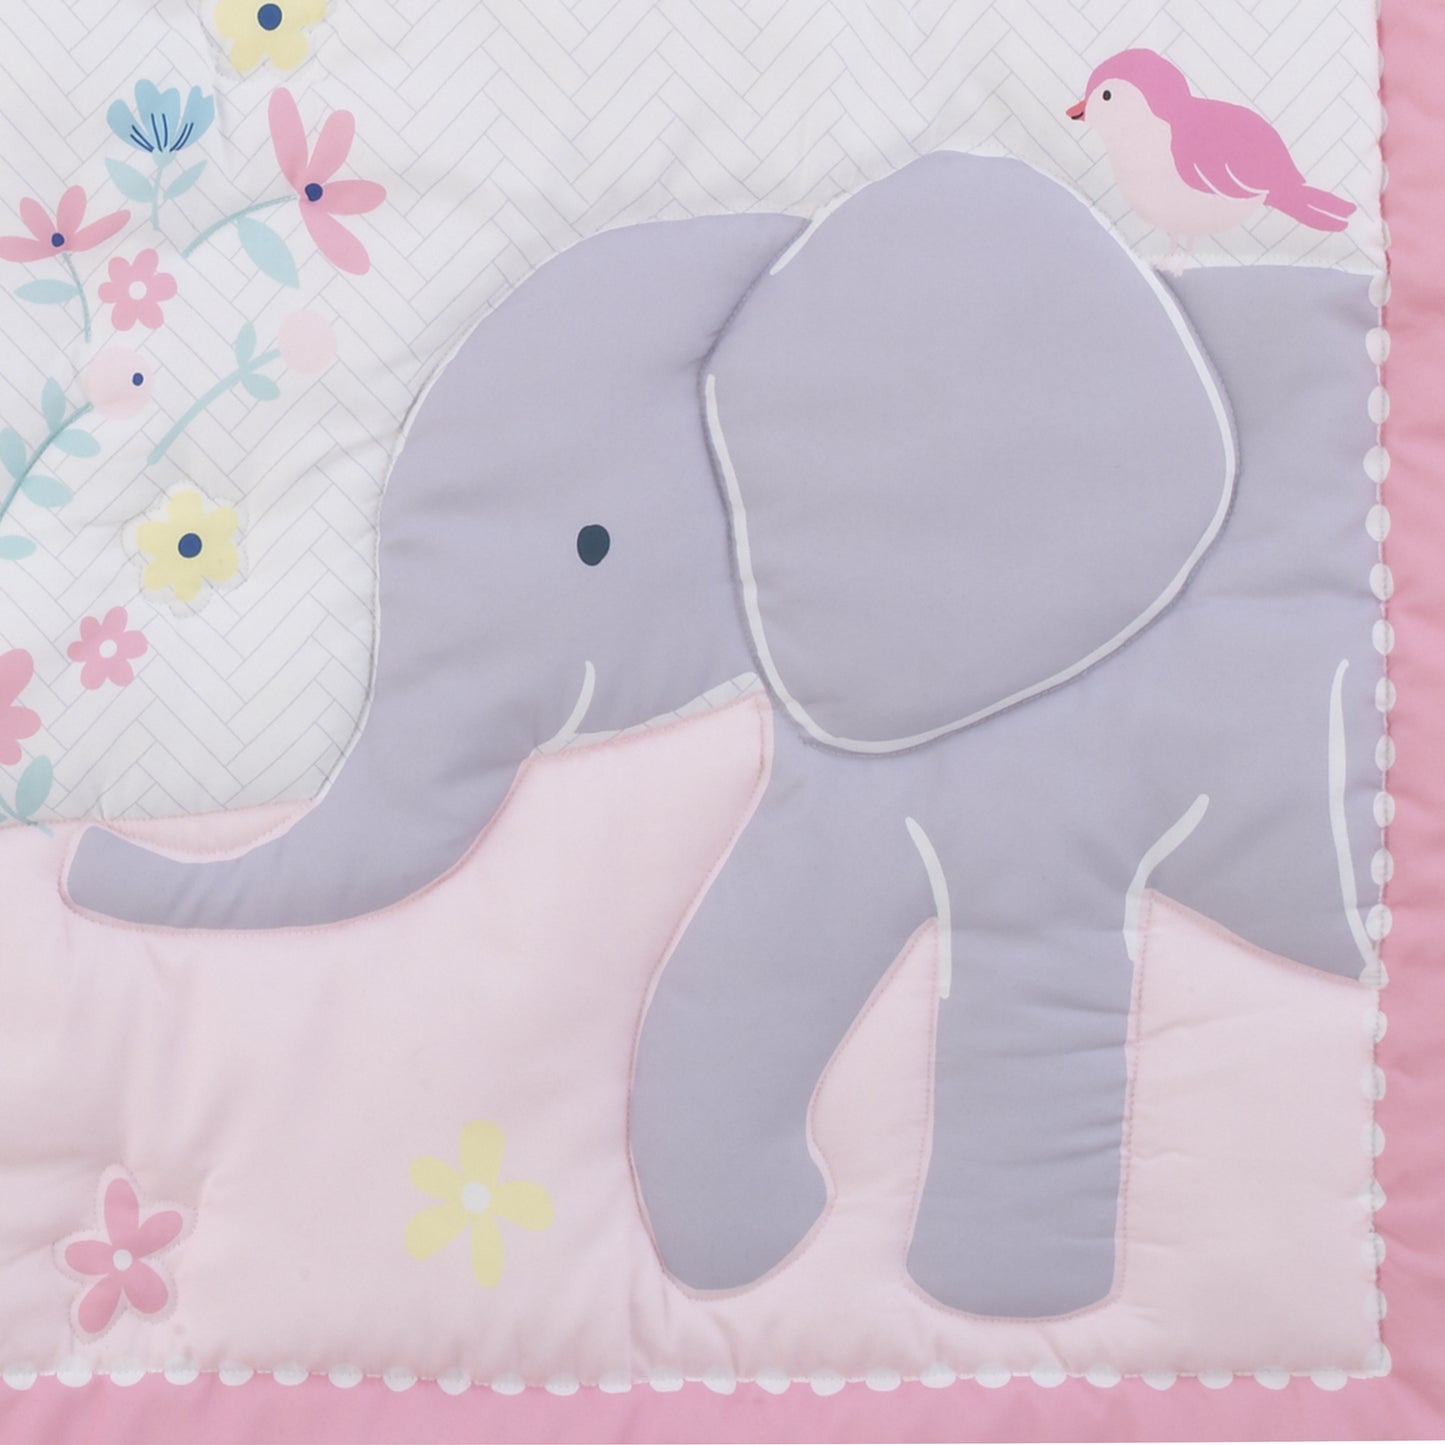 Carter's Floral Elephant Pink and Gray Bird, Butterfly and Flowers 3 Piece Nursery Crib Bedding Set - Comforter, Fitted Crib Sheet, and Crib Skirt